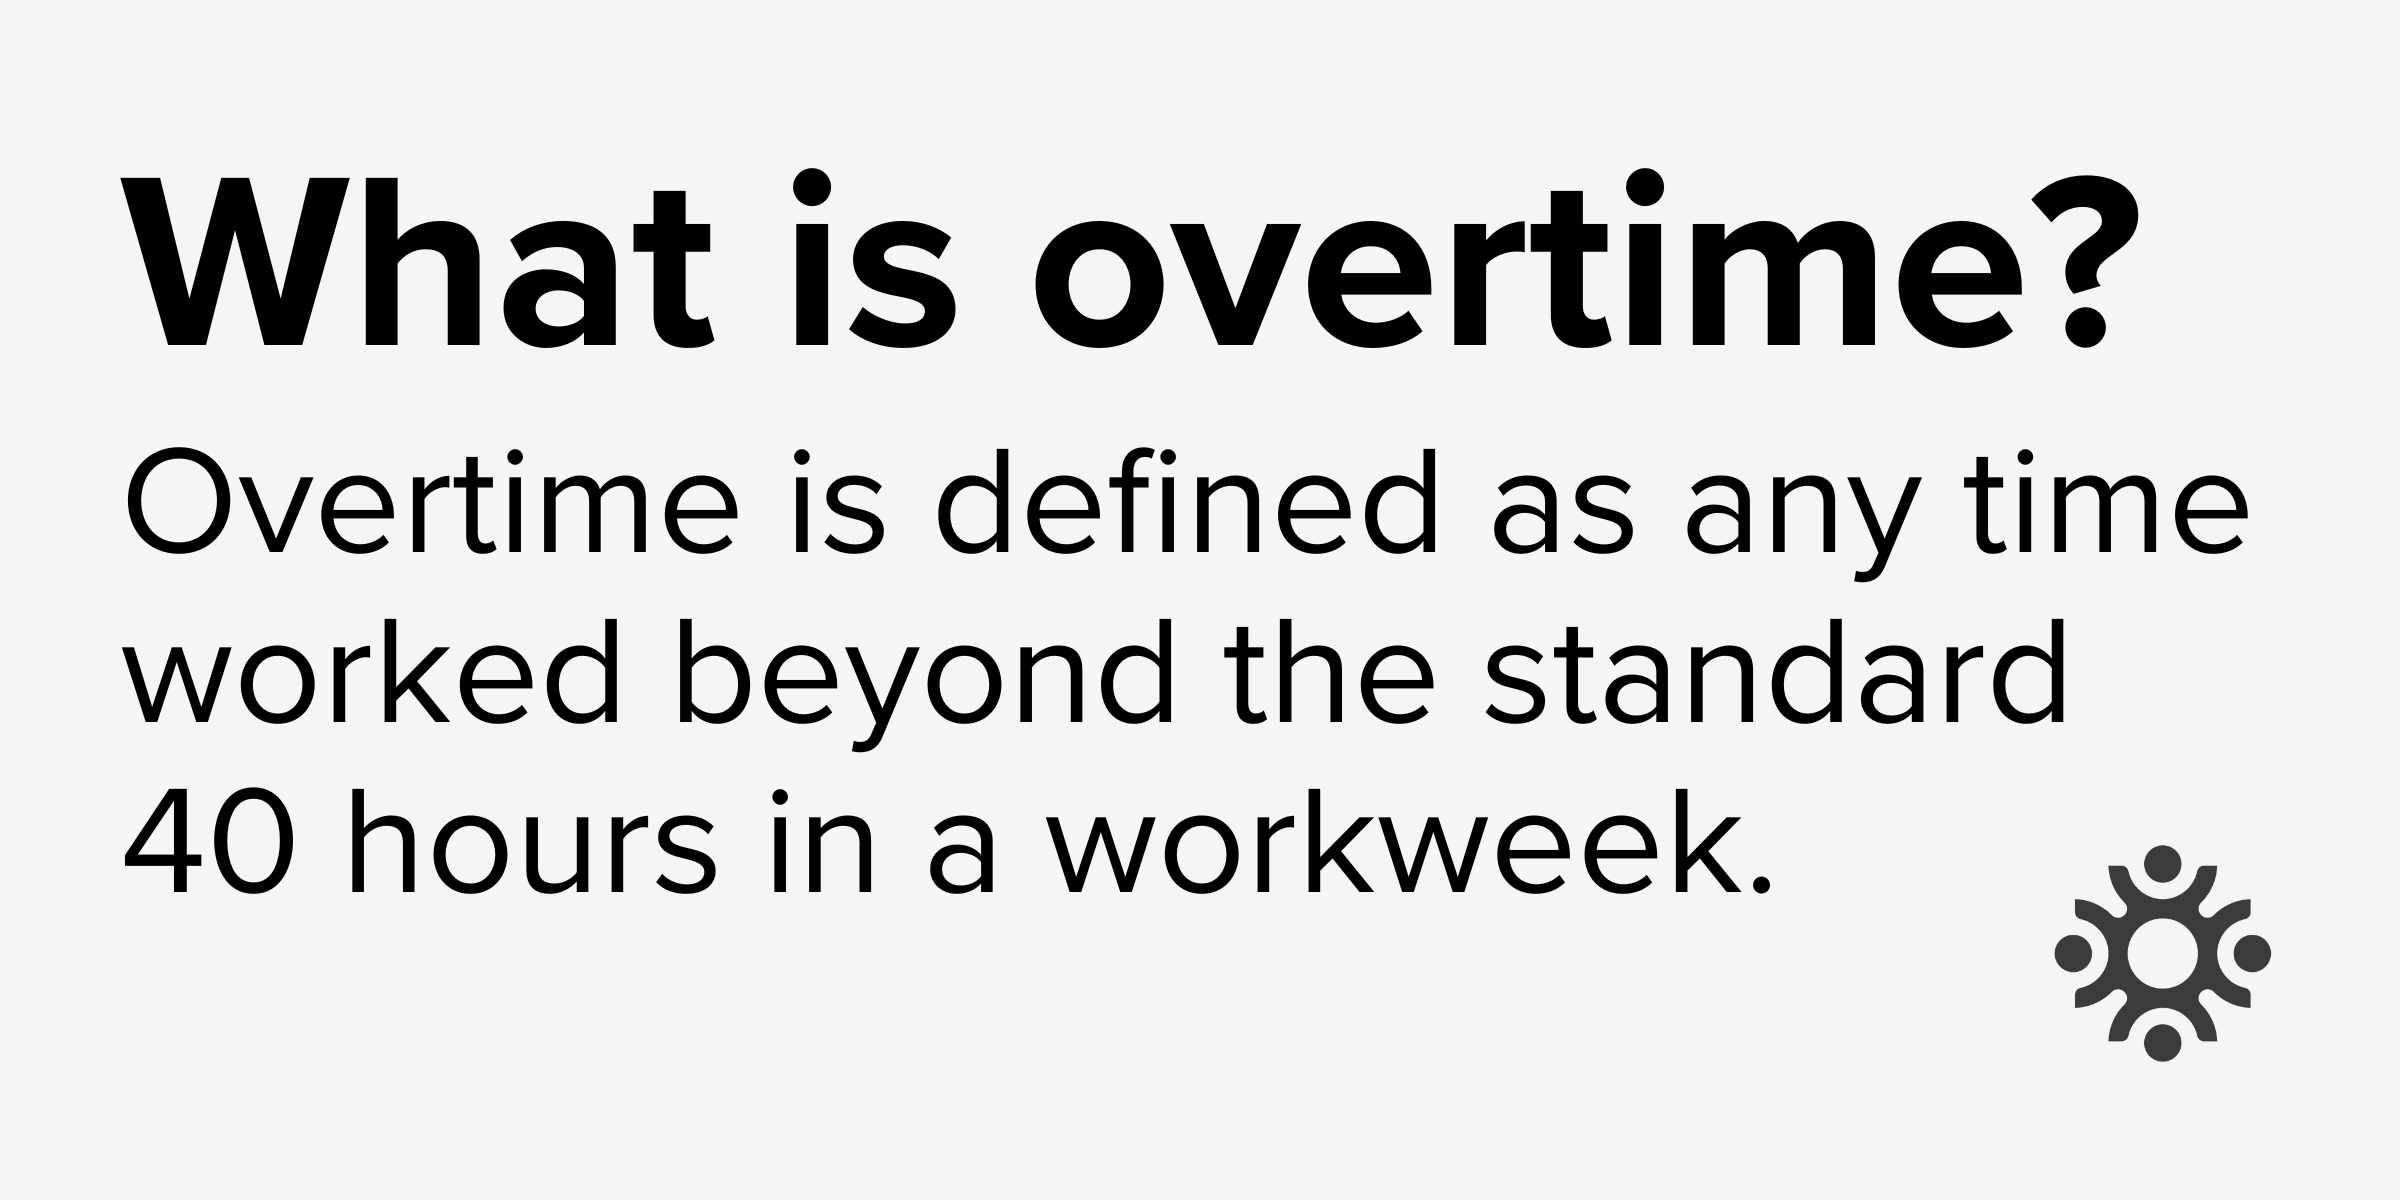 What is overtime